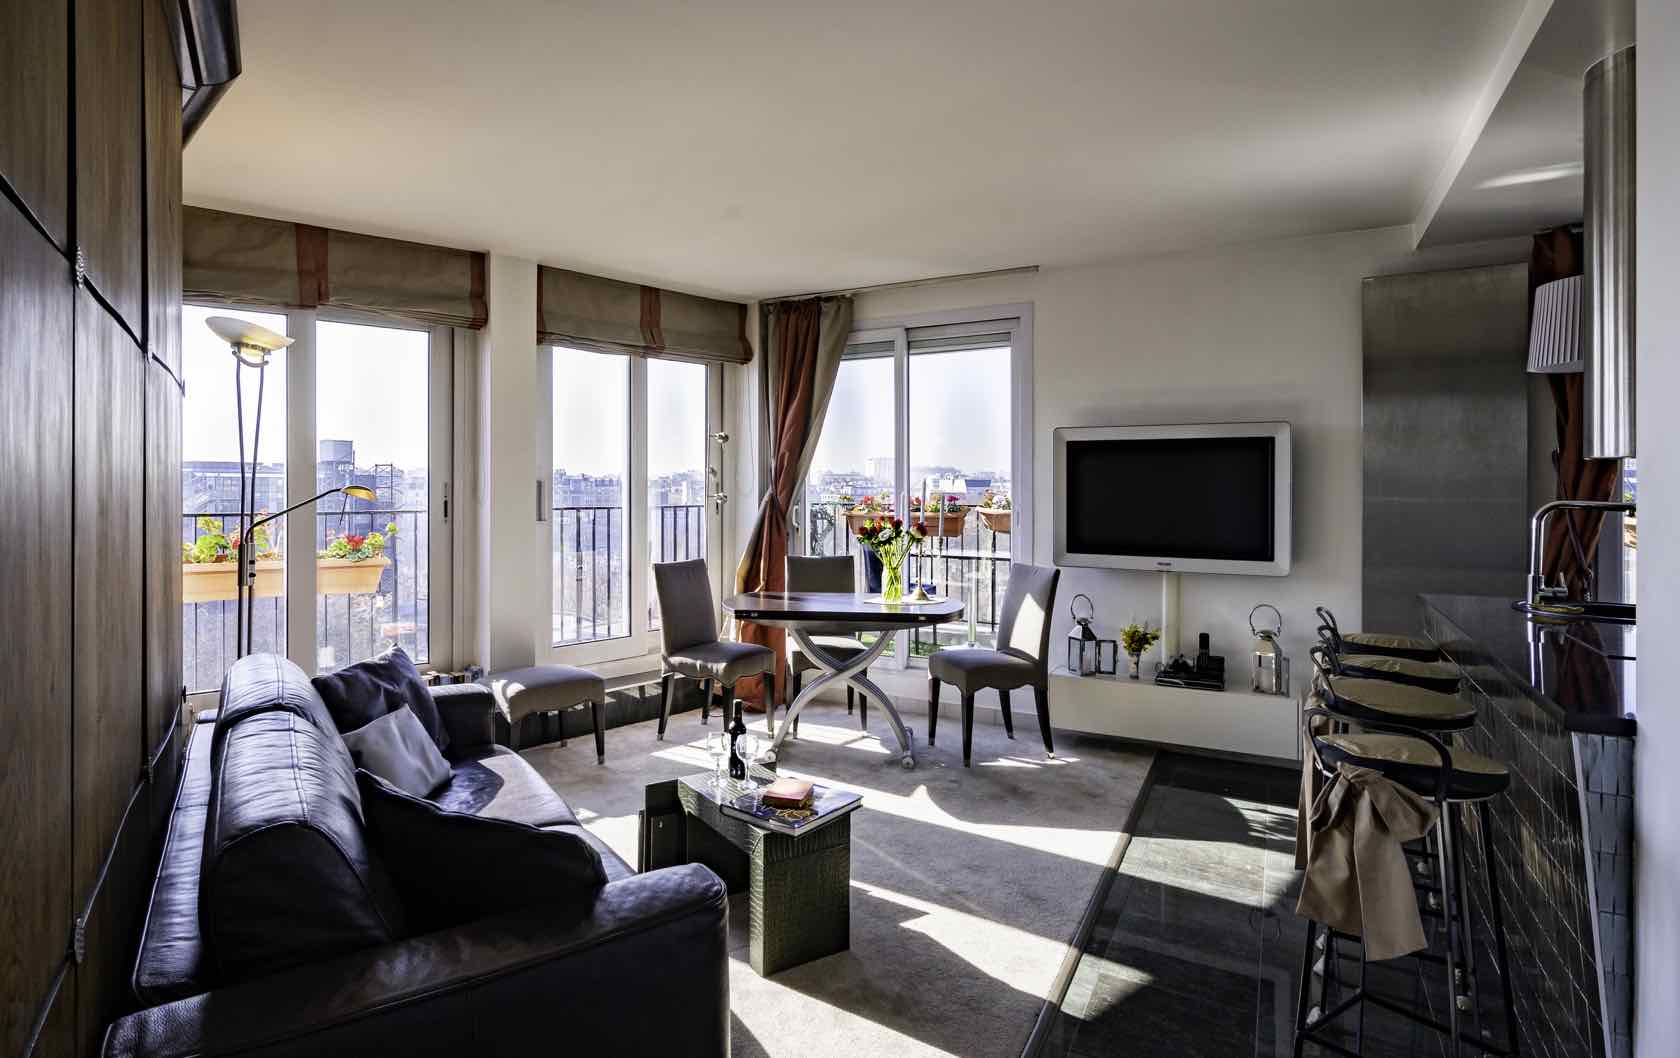 One-Bedroom Apartment for Sale with Breathtaking Views of Paris - Paris ...